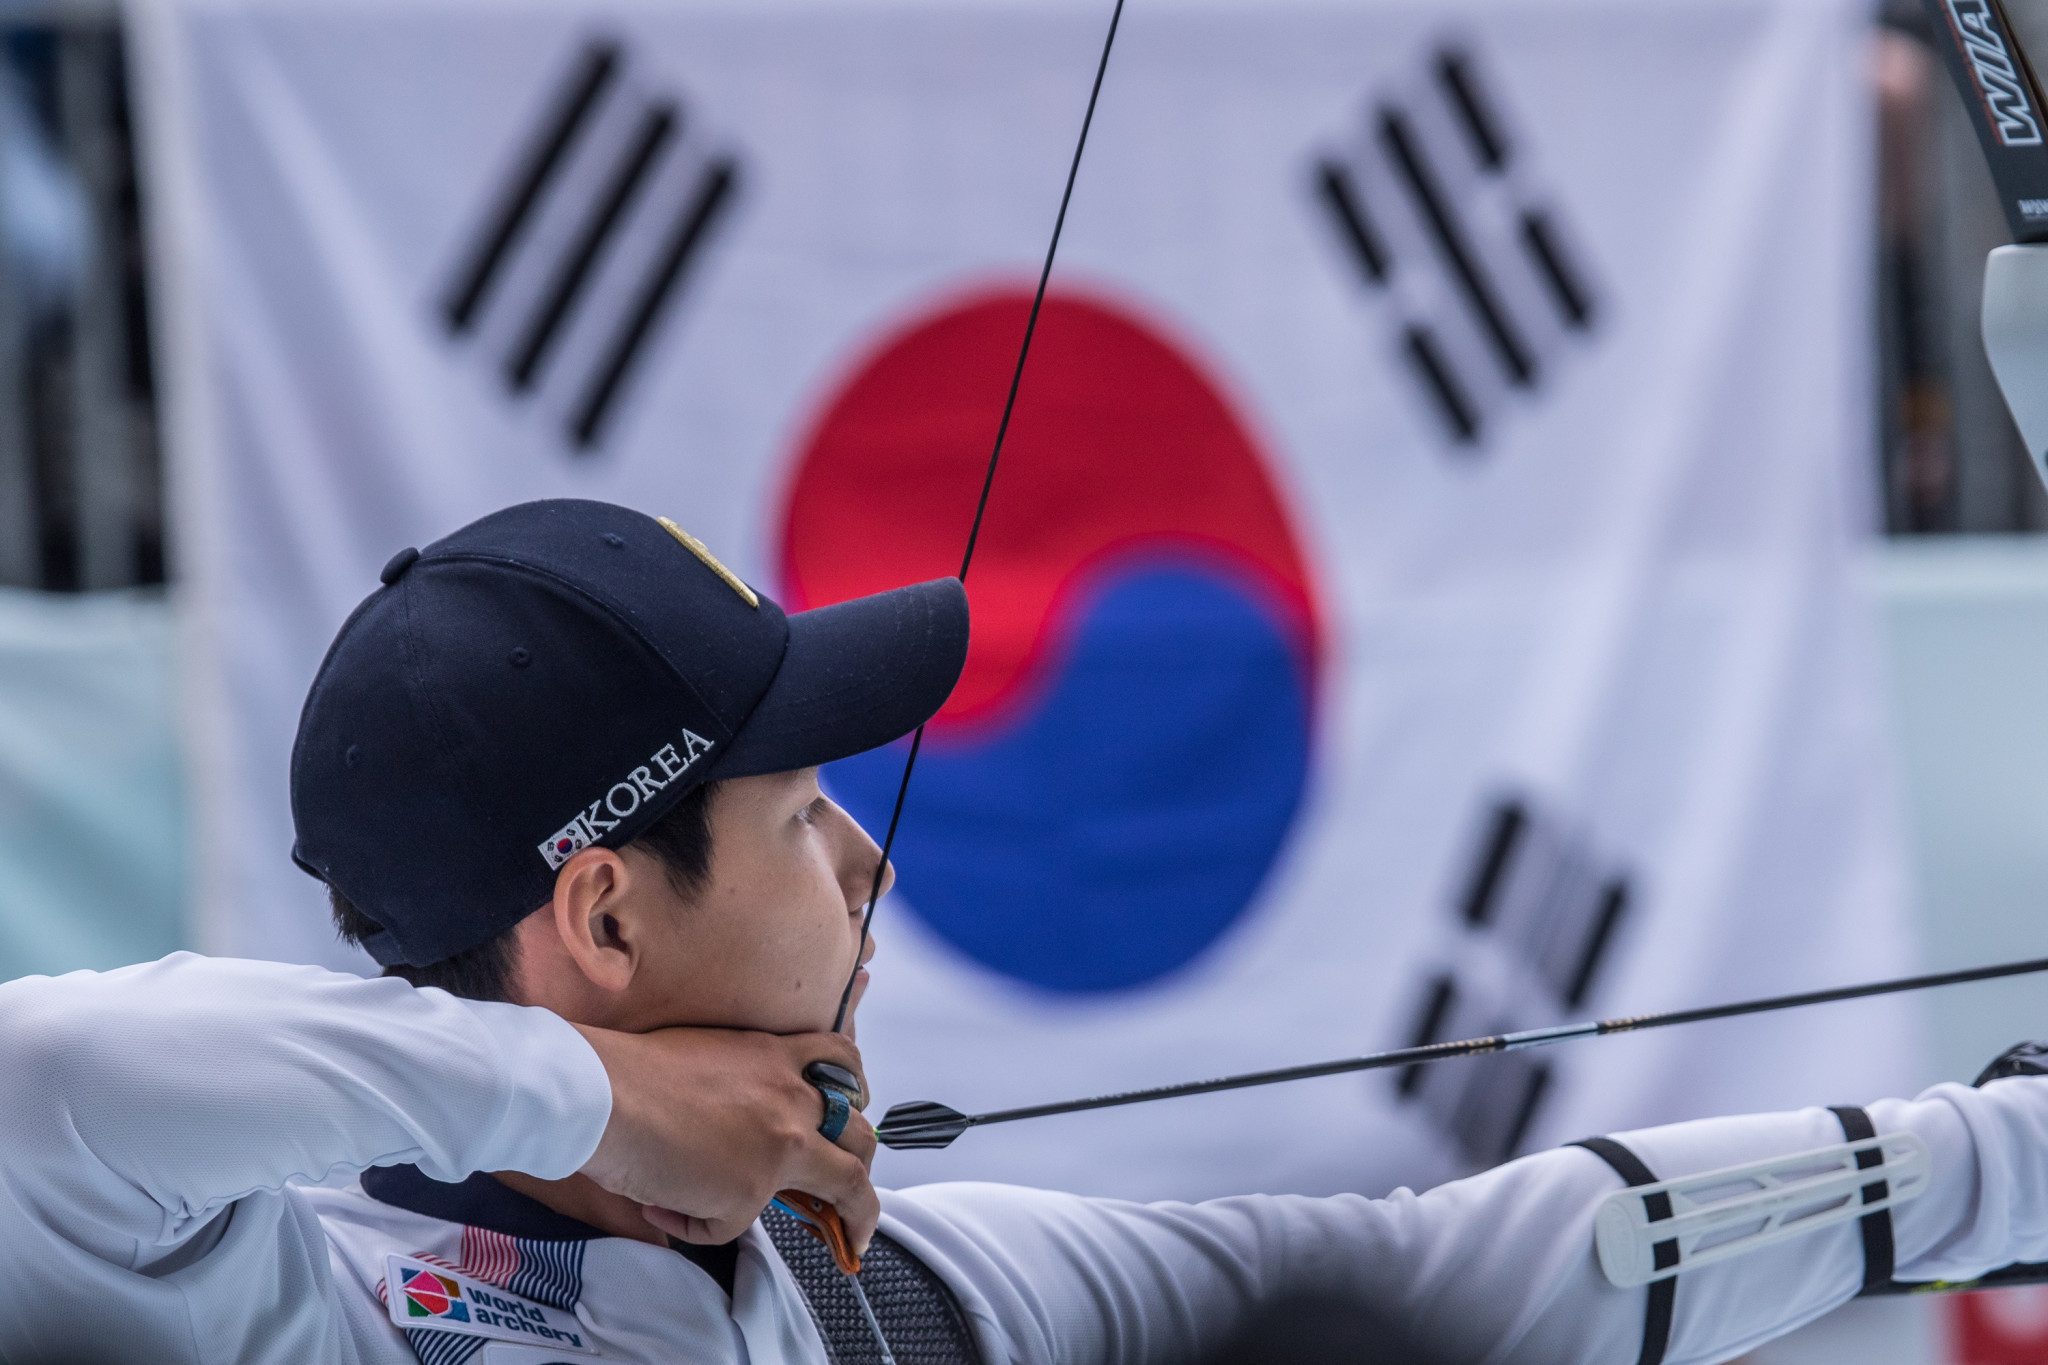 The South Korean city of Gwangju is due to play host to the Asian leg of the Archery World Cup from May 16 to 22 next year ©Getty Images